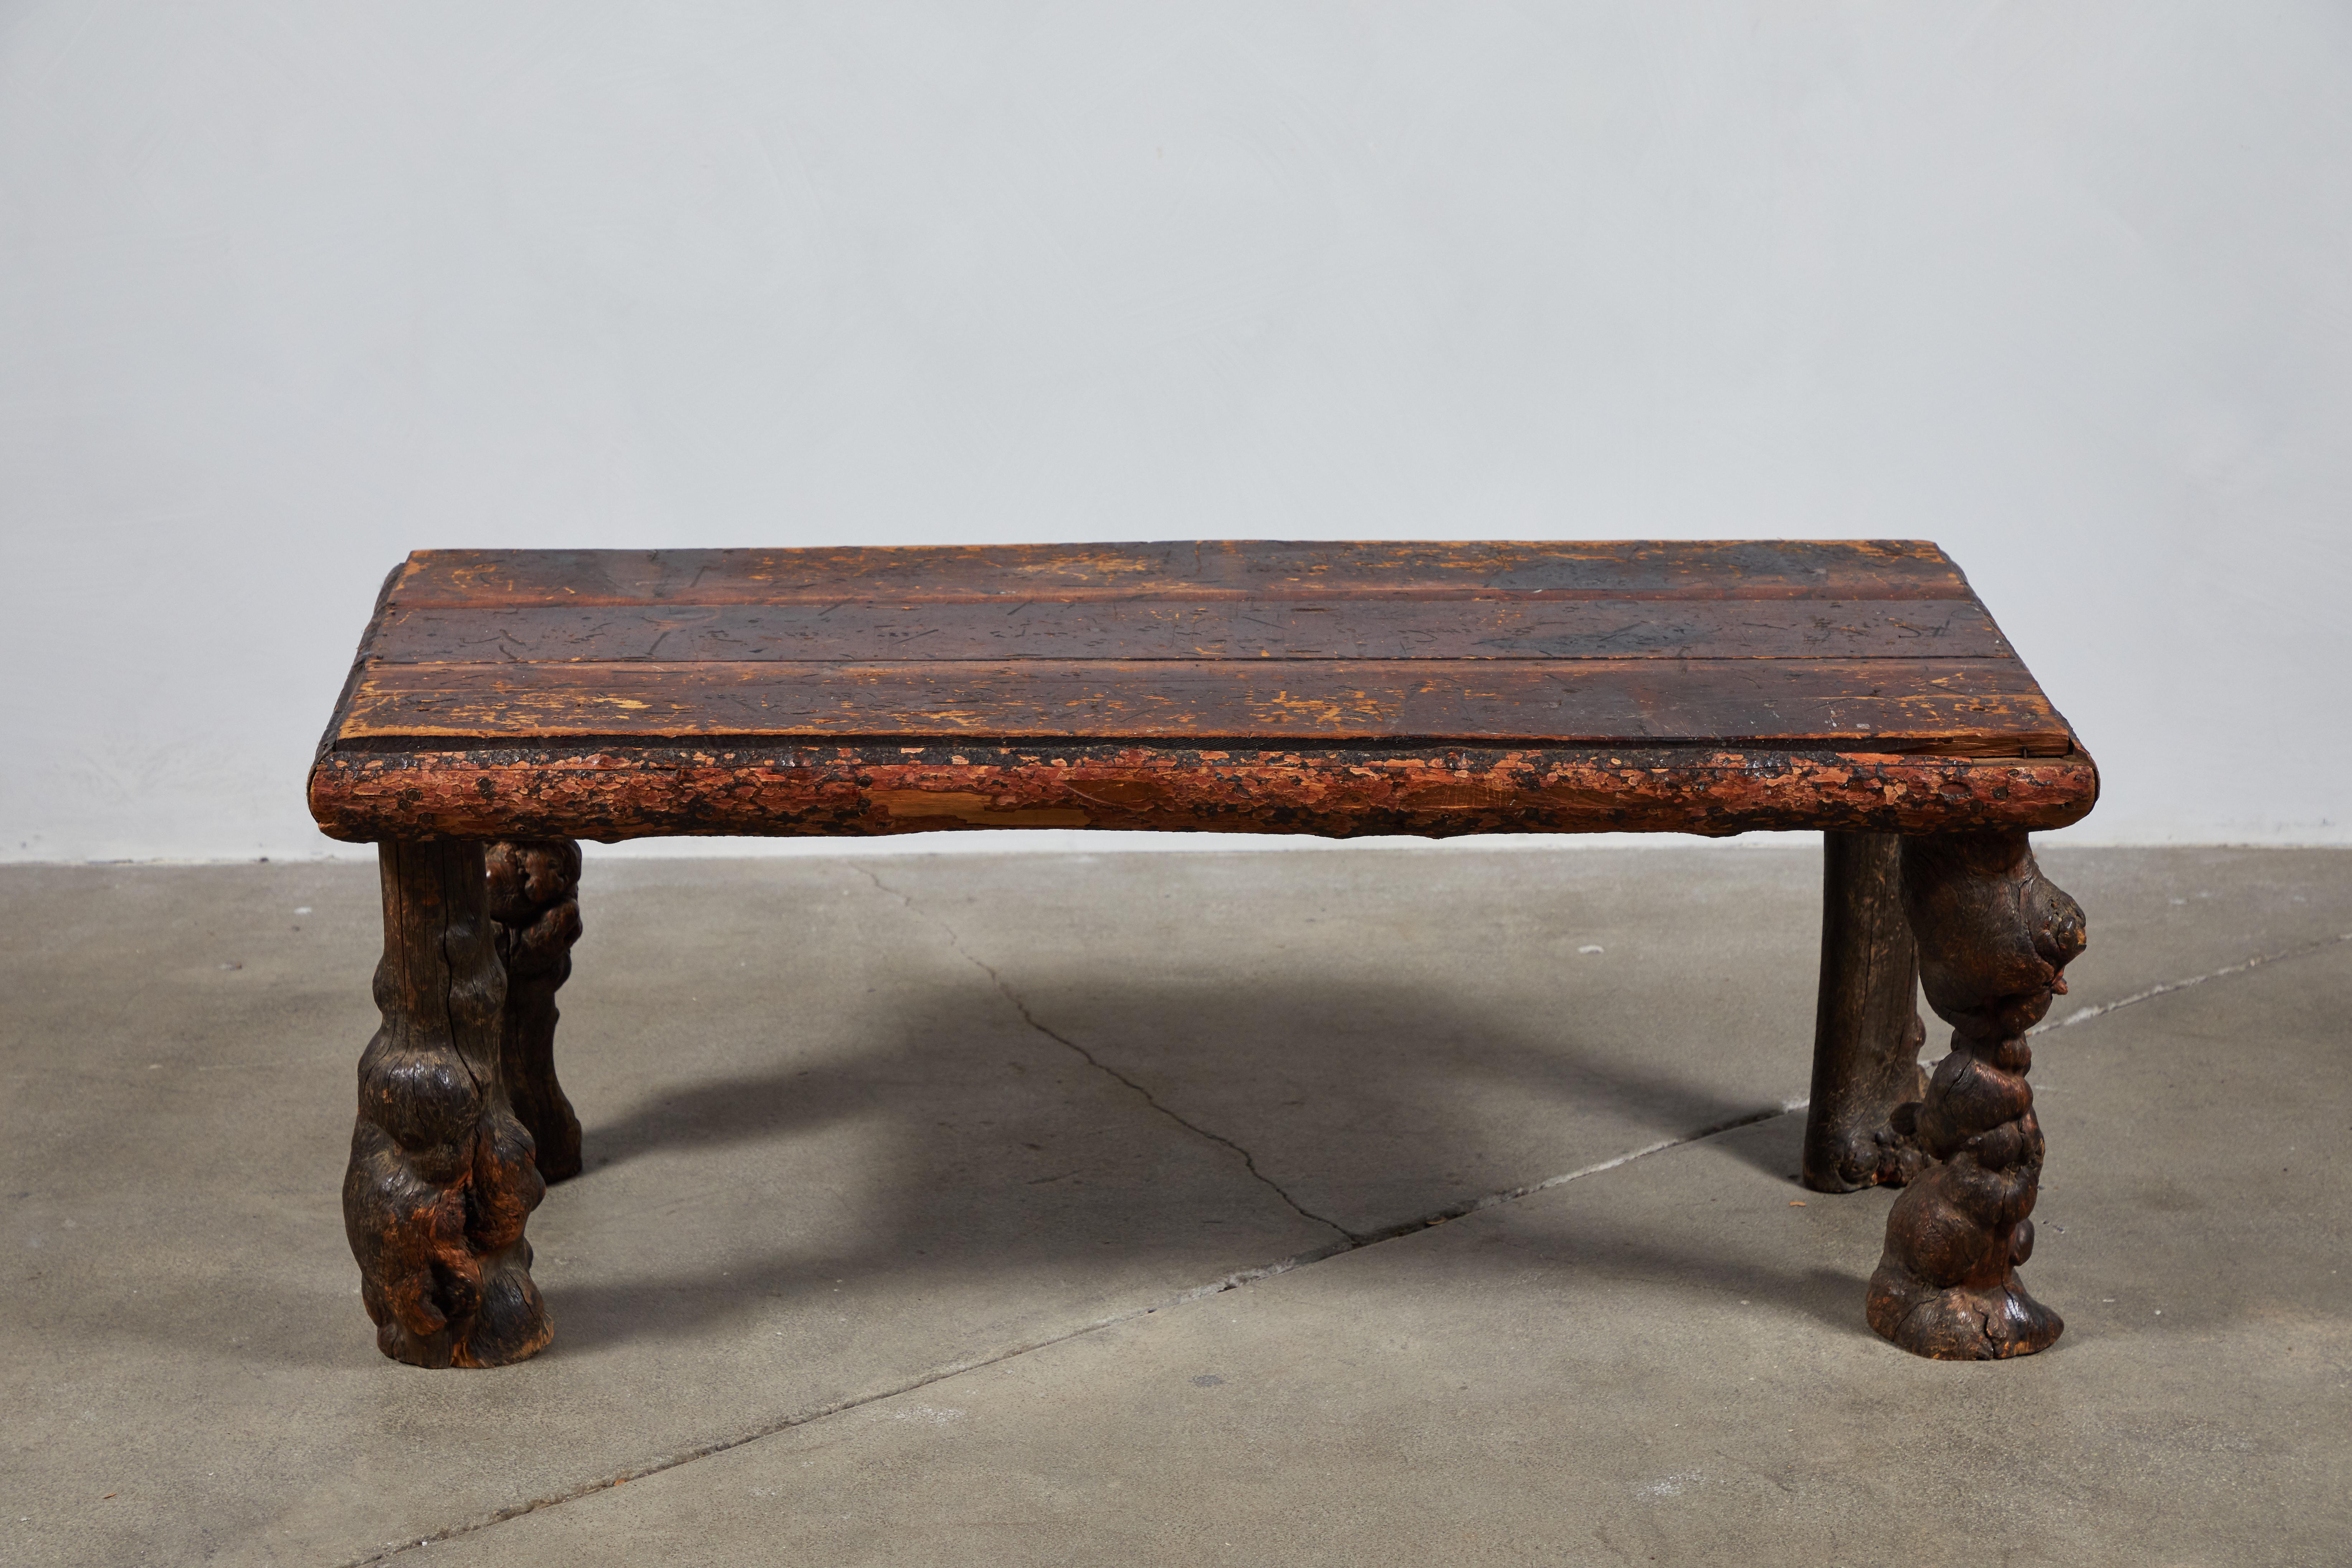 Unique tall table with unique burled wood legs and chunky top. Original distressed finish. The table is tall enough to be a bench as well.